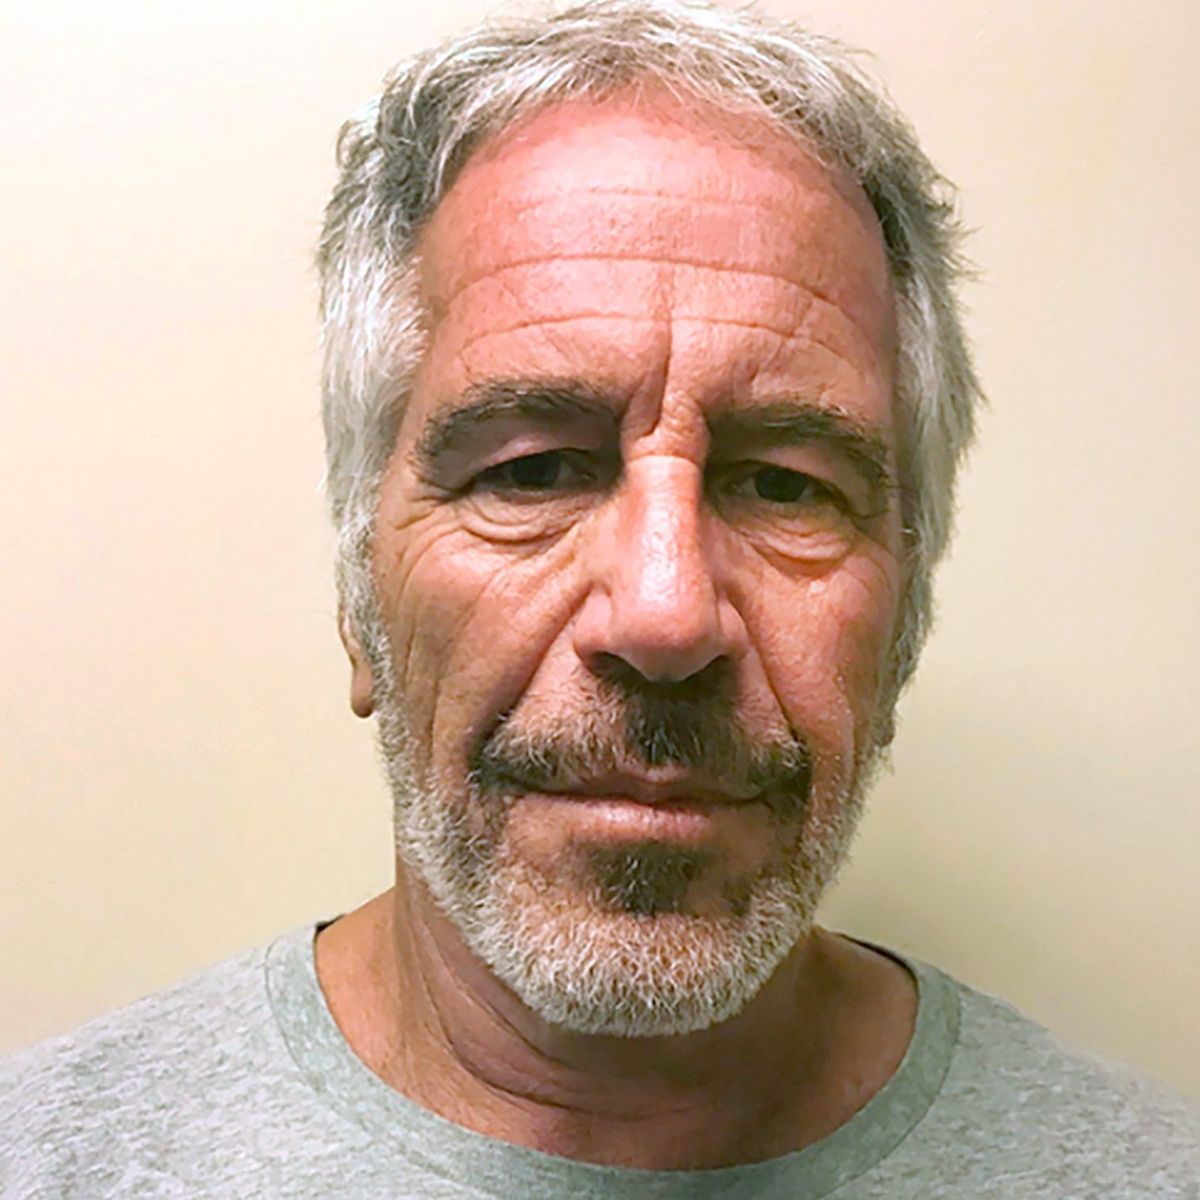 What Weve Learned From Recent Jeffrey Epstein Allegations